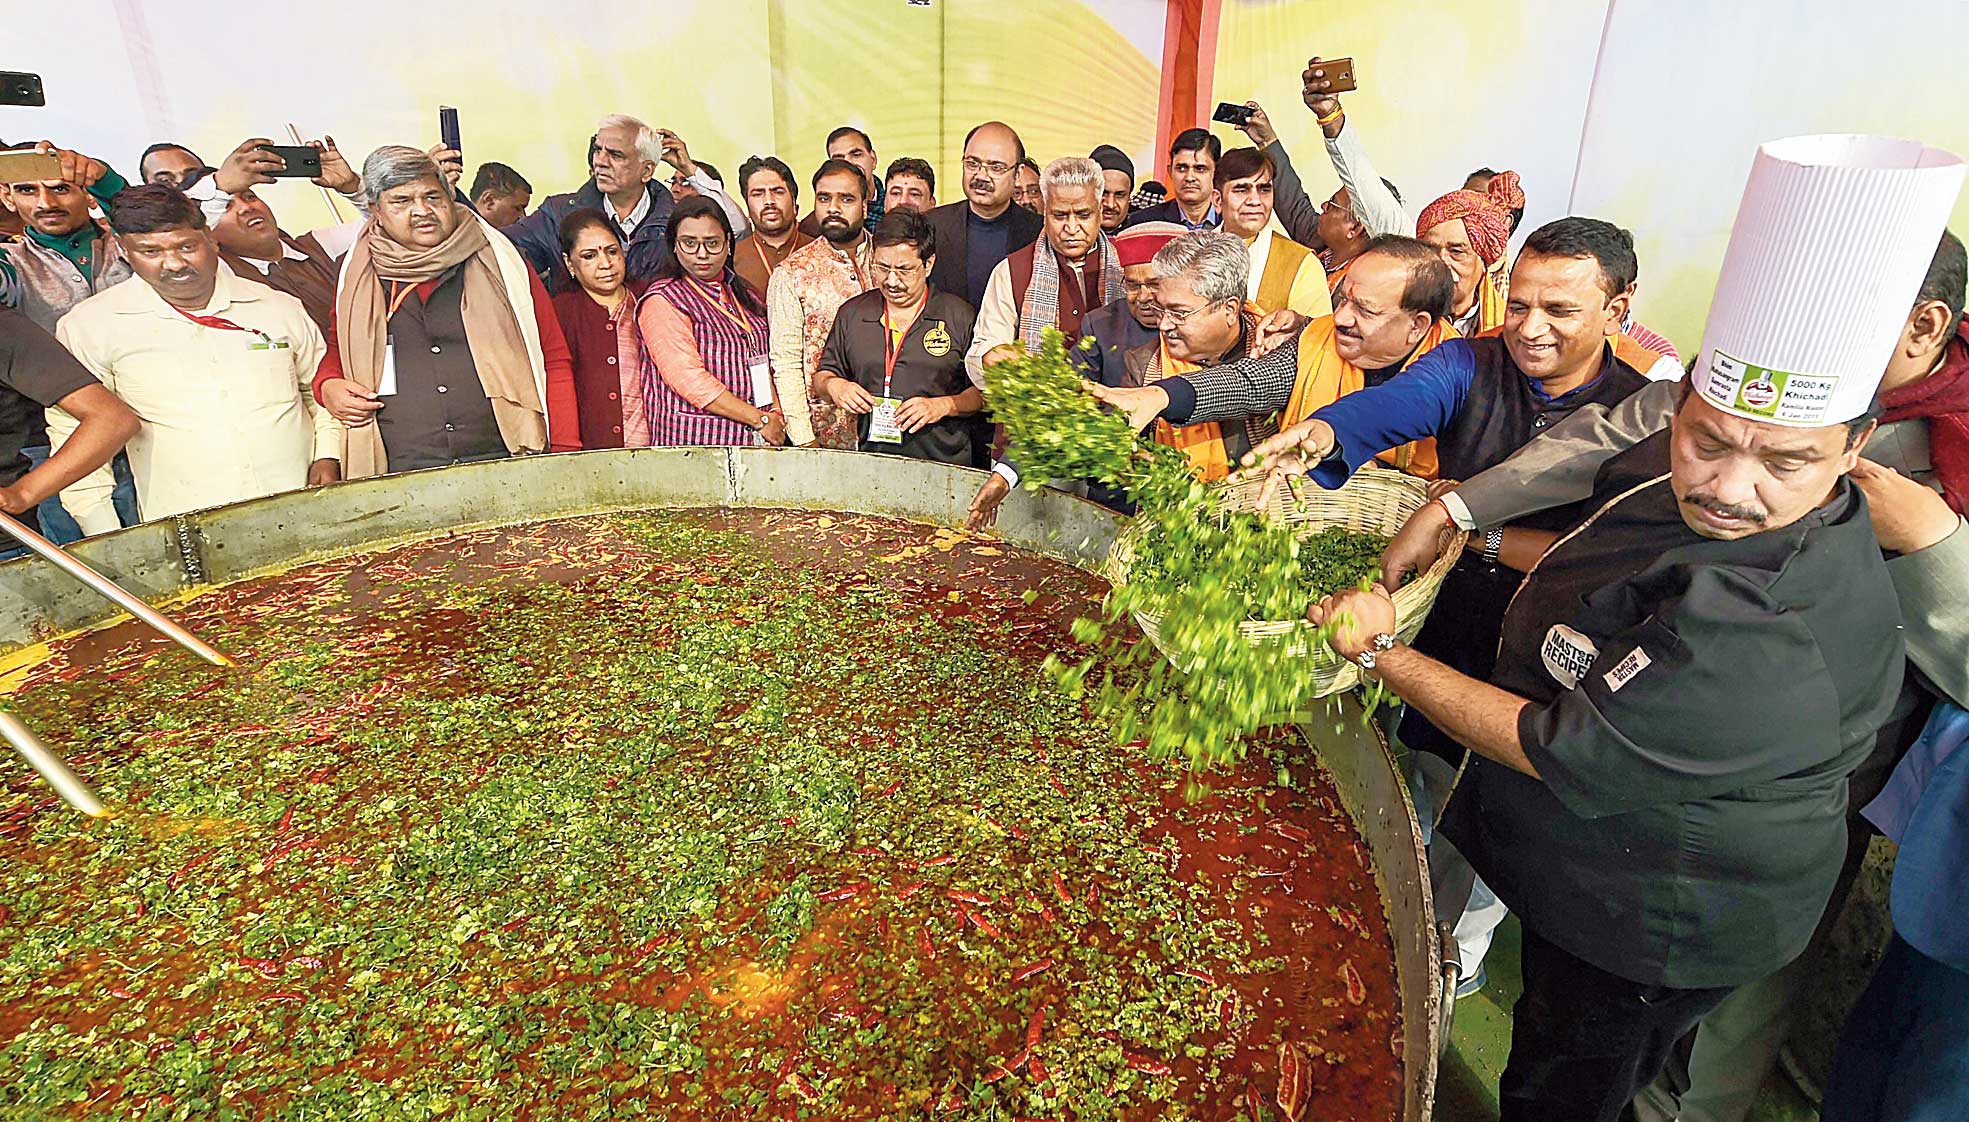 Union ministers Harsh Vardhan and Thaawar Chand Gehlot and other BJP leaders prepare khichdi during an event called Bhim Mahasamagam on Ramlila Maidan in New Delhi on Sunday. 
